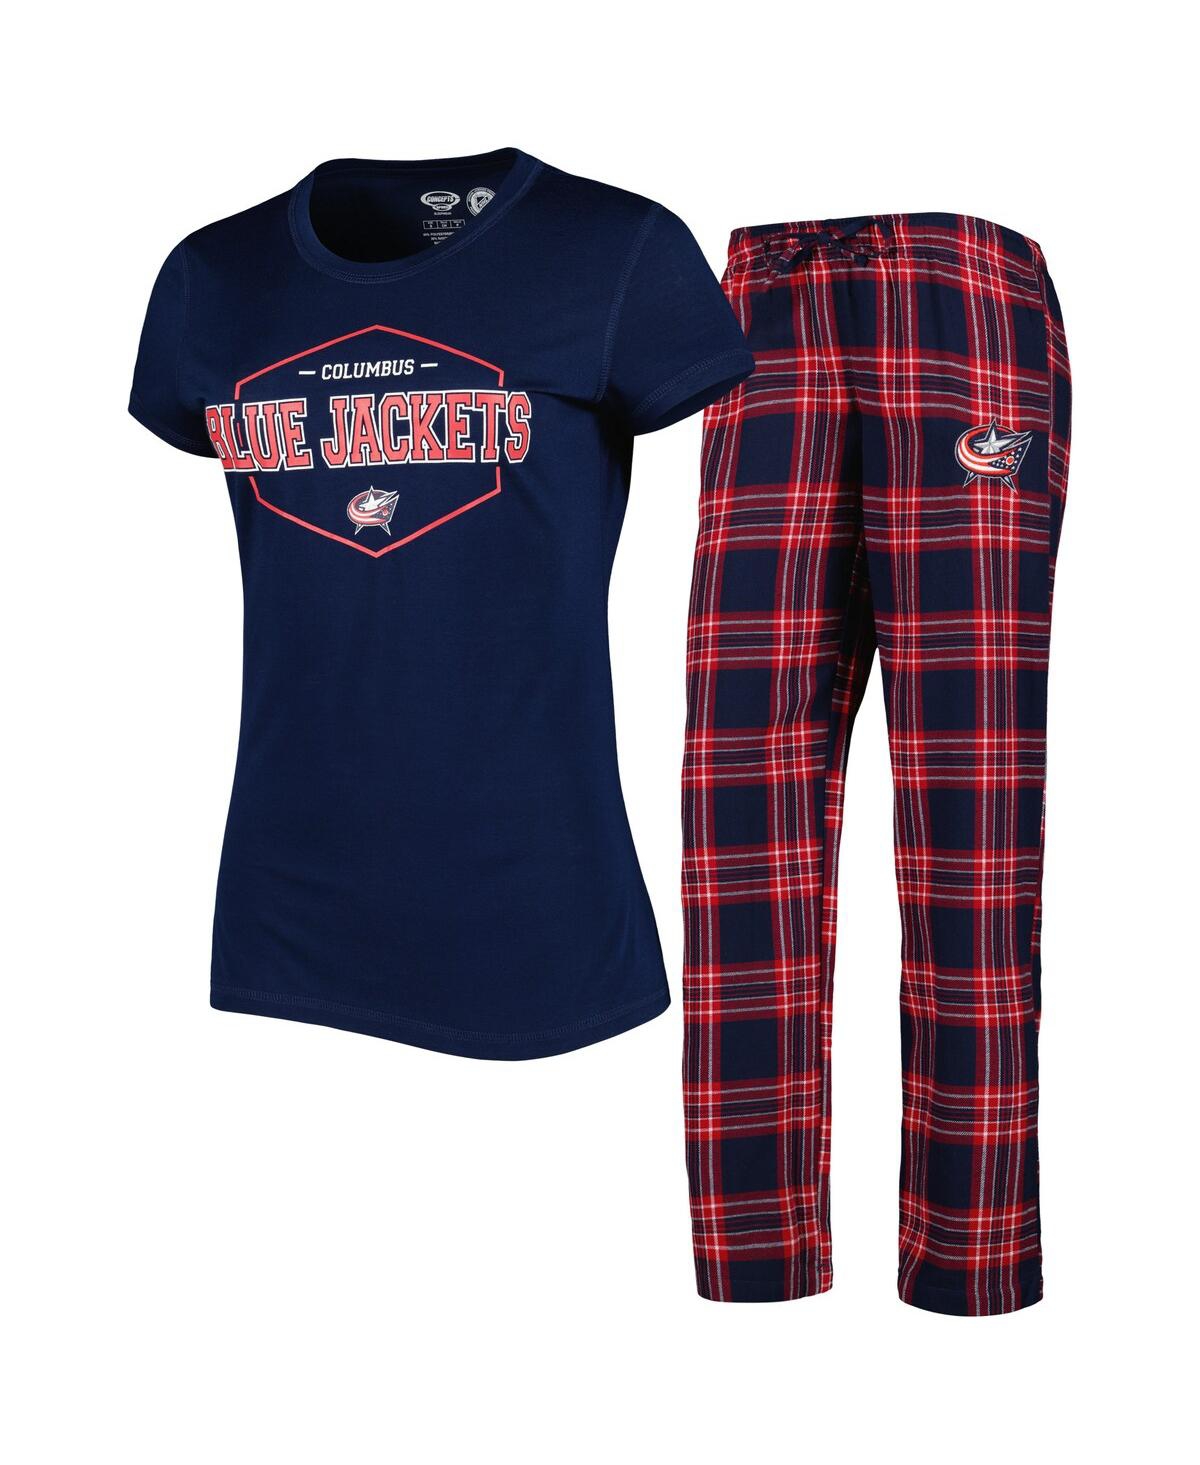 Women's Concepts Sport Navy, Red Columbus Blue Jackets Badge T-shirt and Pants Sleep Set - Navy, Red